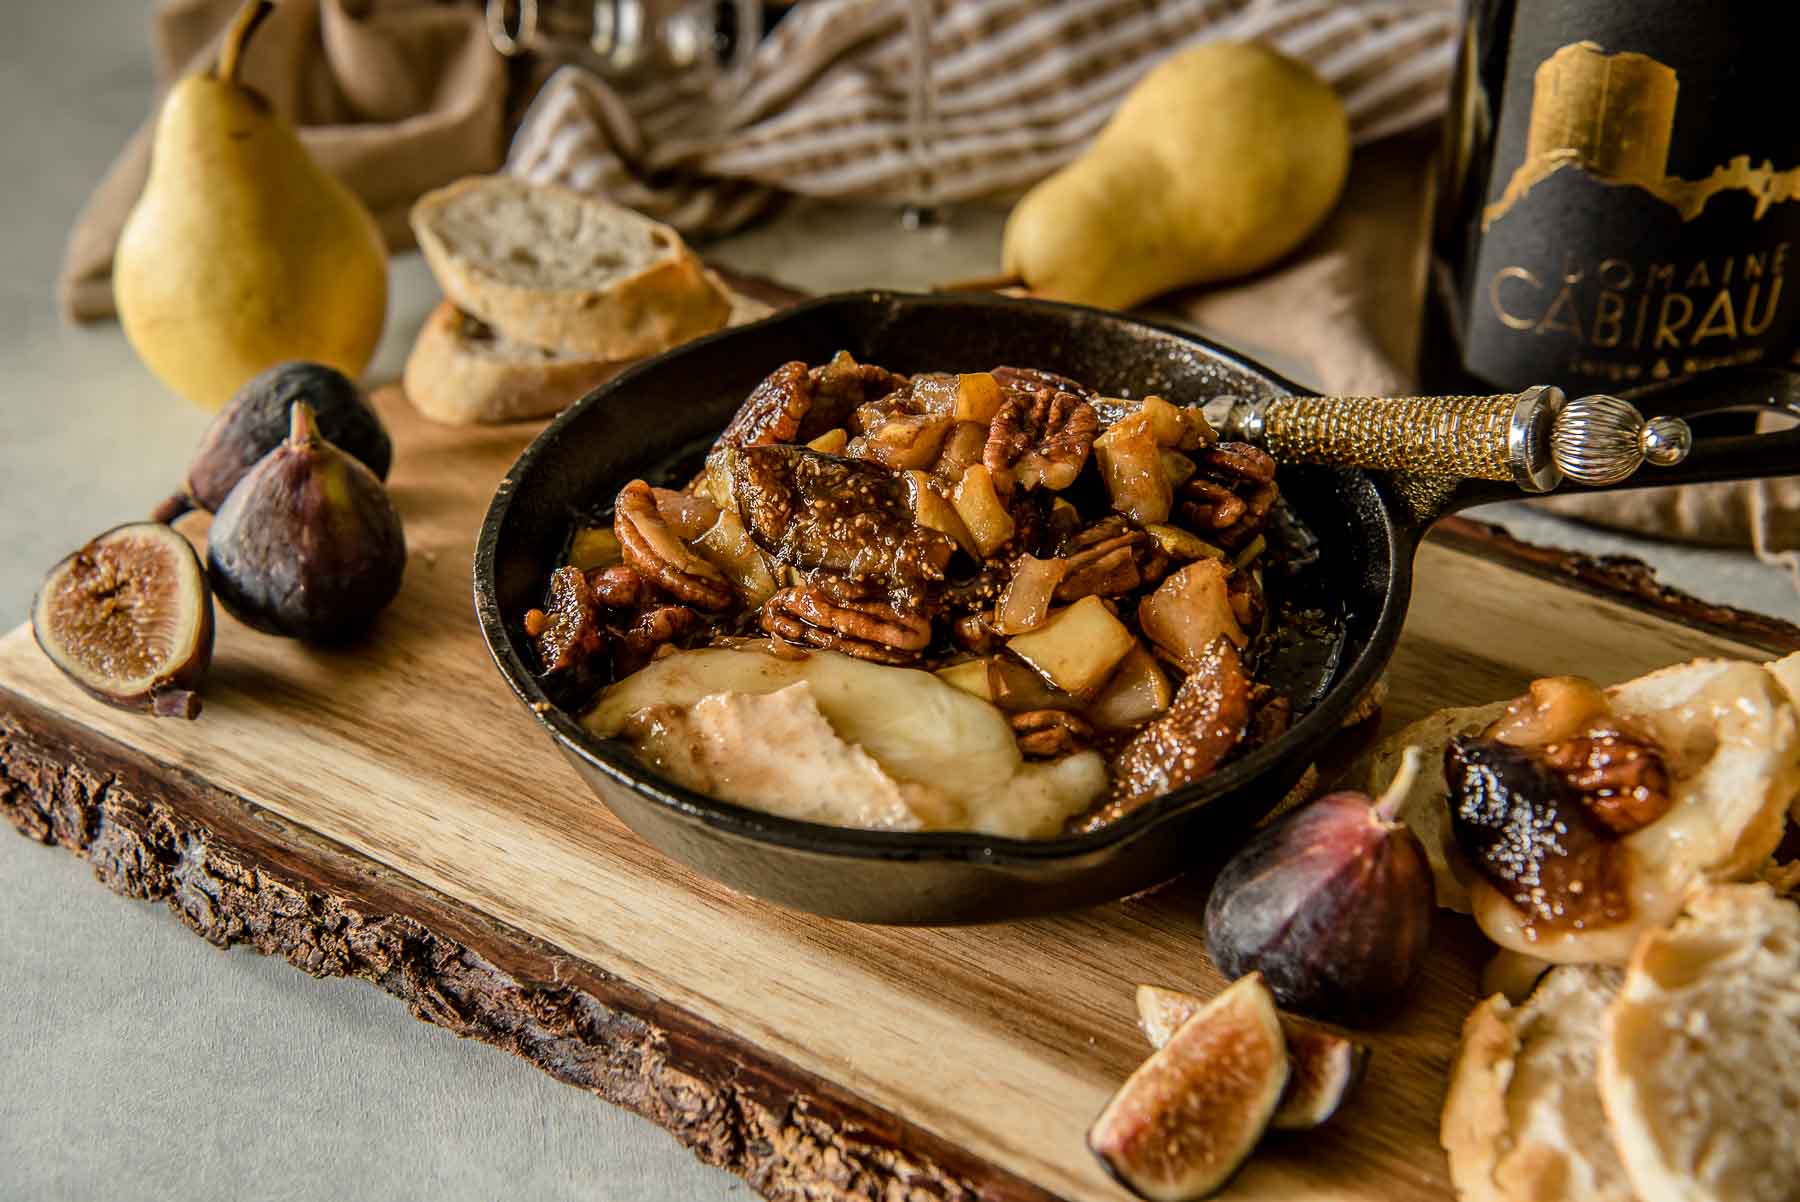 This creamy Brown Butter Fig & Pear Baked Brie is both elegant and comforting, and is sure to be the hit of any holiday or cold weather party! Figs, pears, pecans, and a little sweetness bring out the best in your favorite soft cheese.